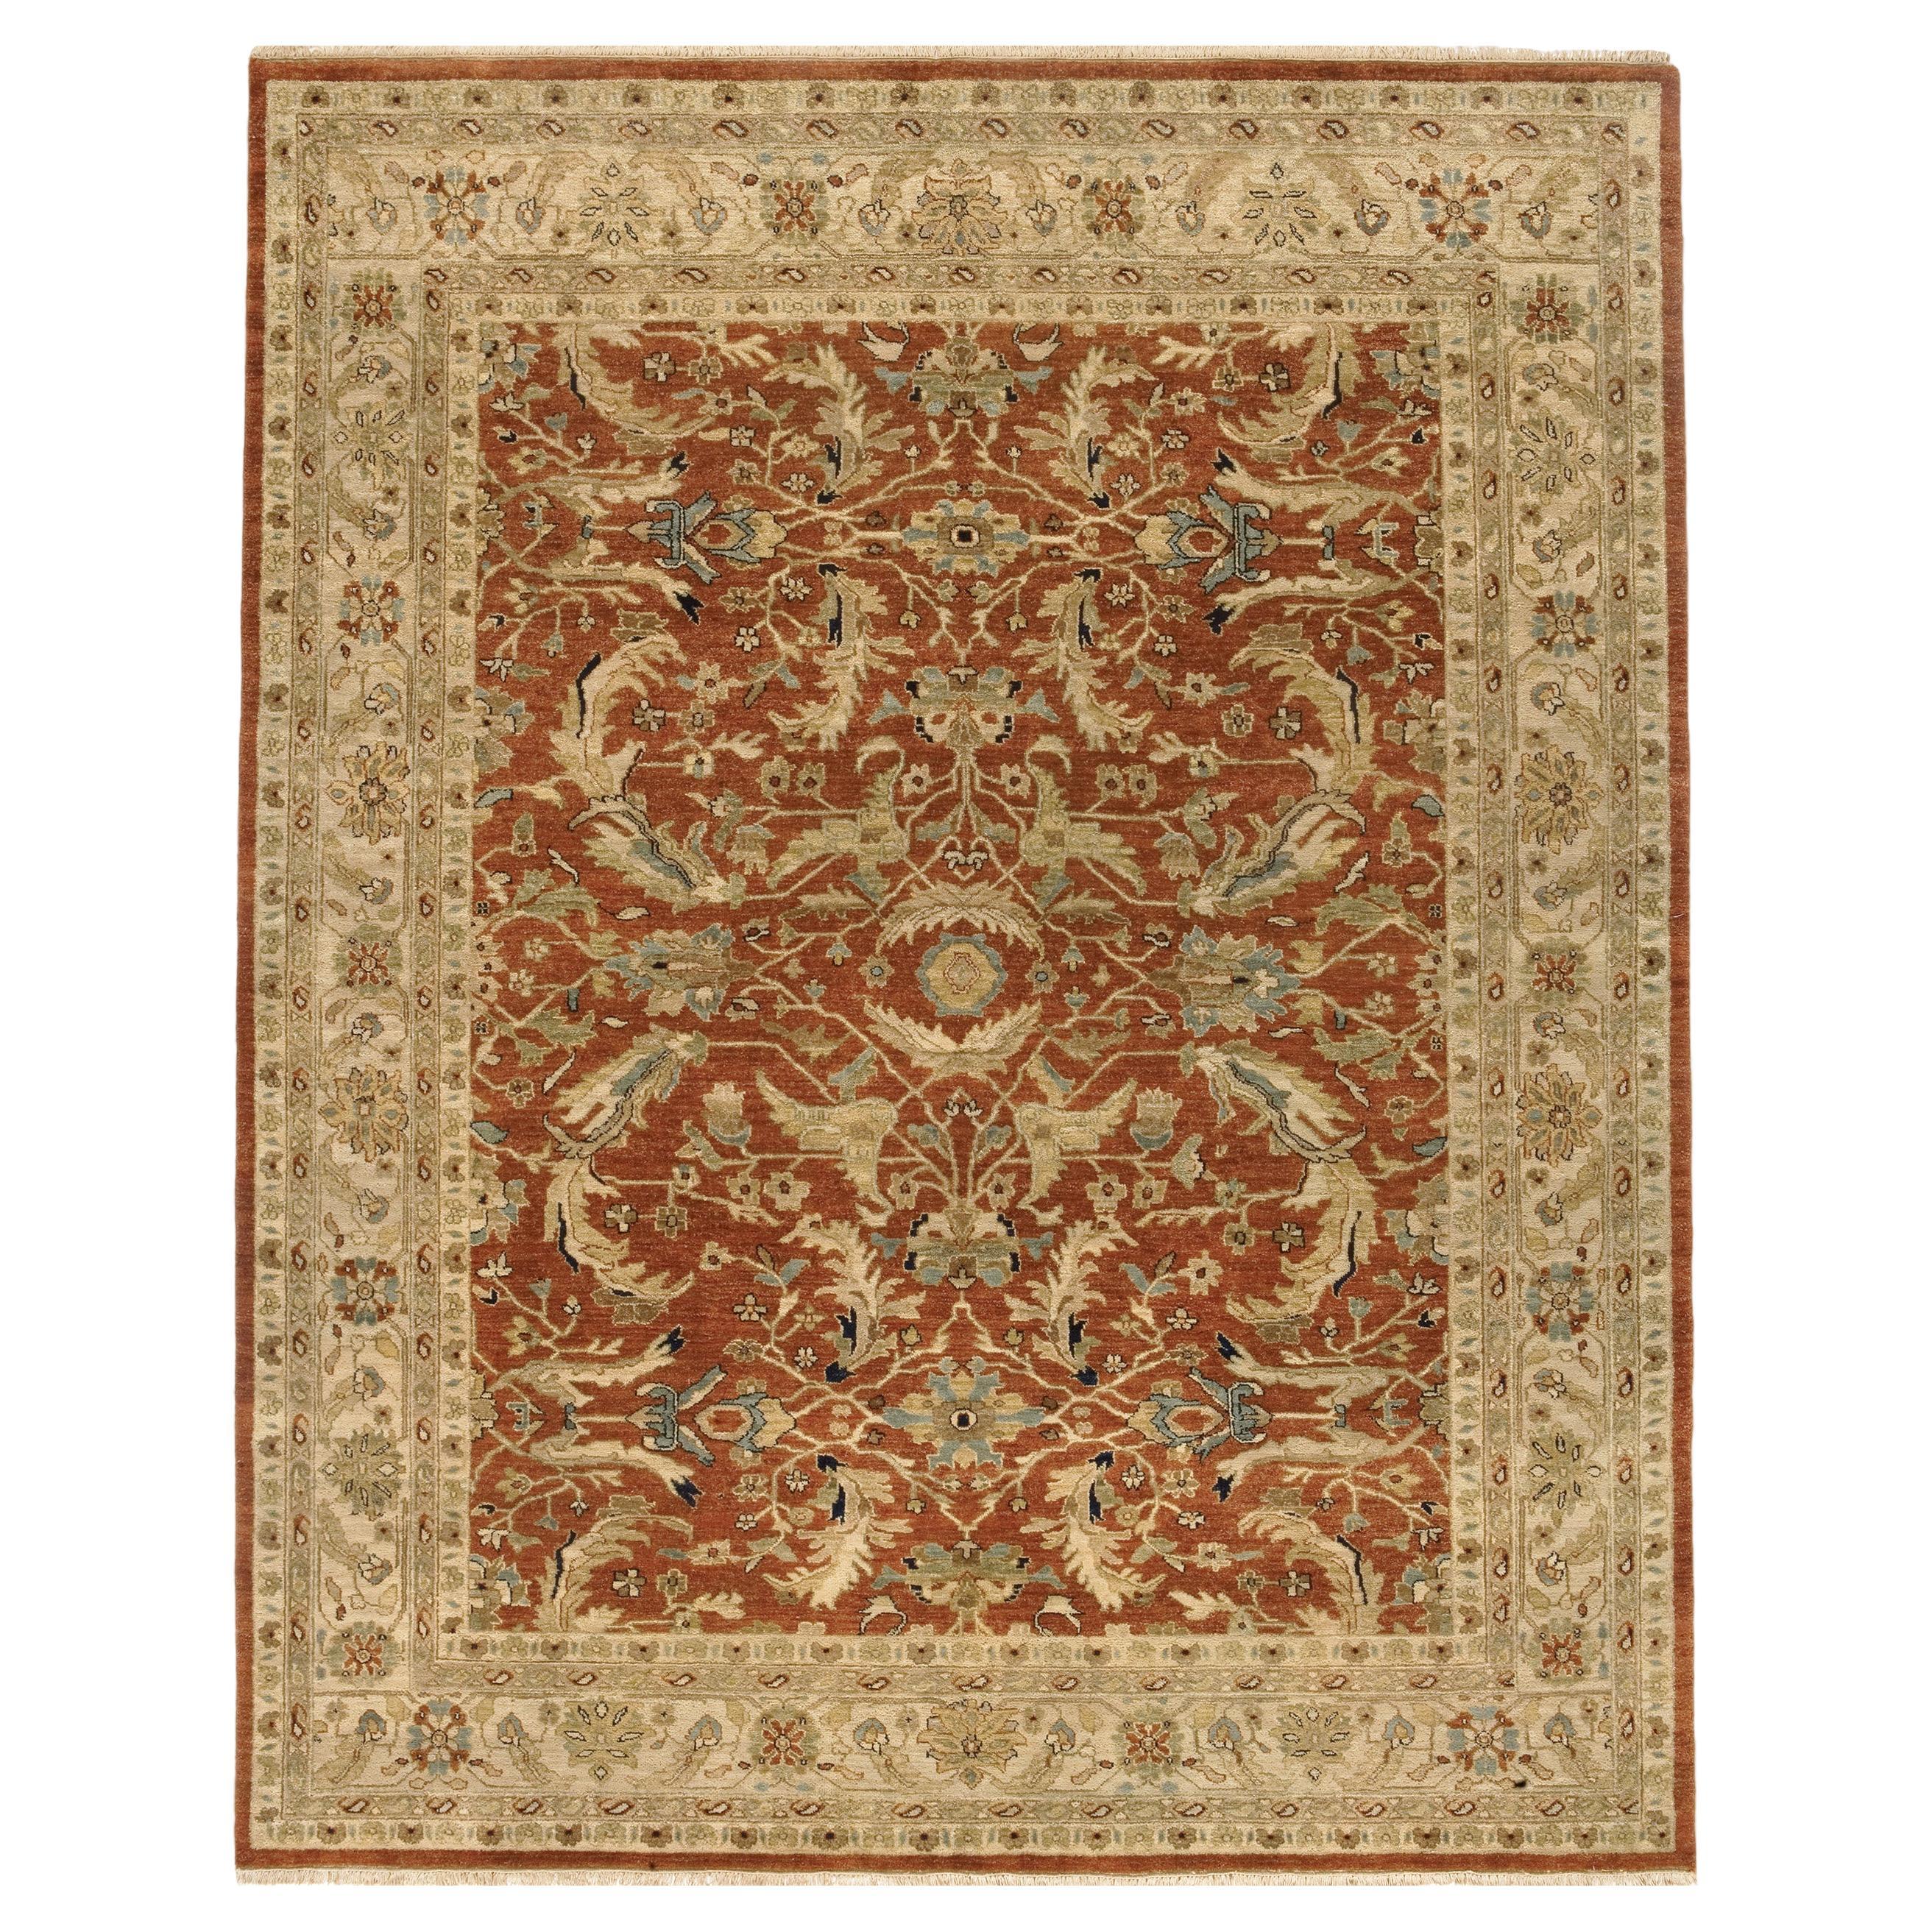 Luxury Traditional Hand-Knotted Brick/Cream 12x15 Rug